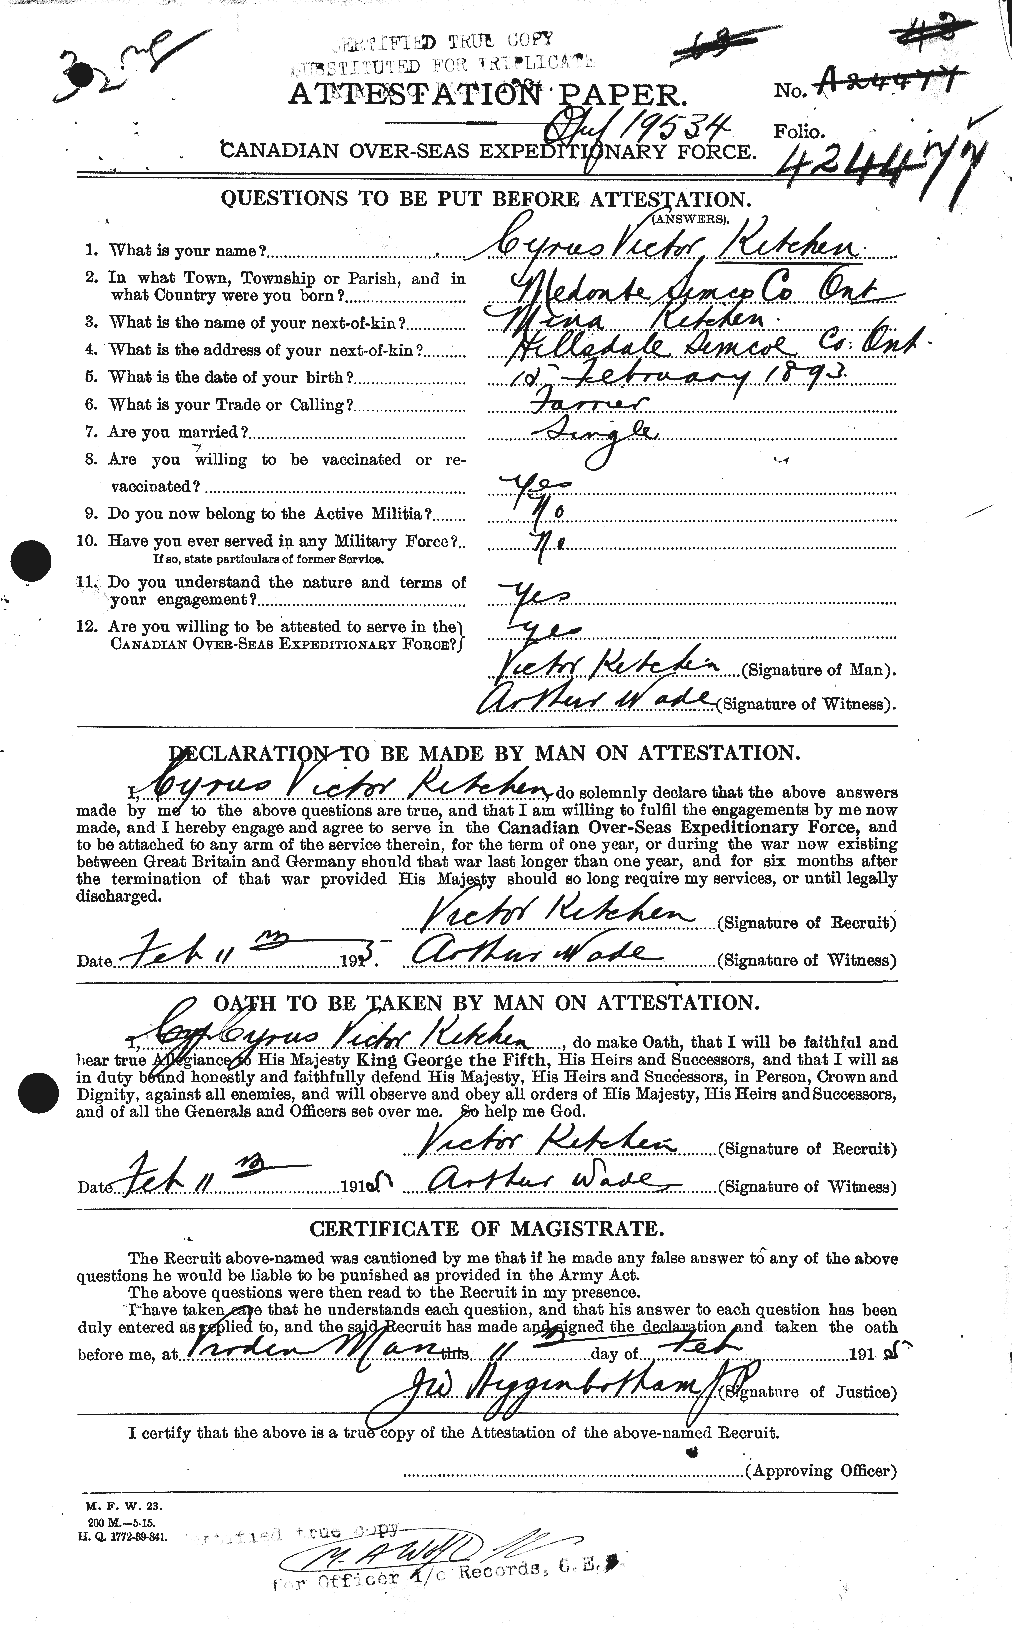 Personnel Records of the First World War - CEF 438459a